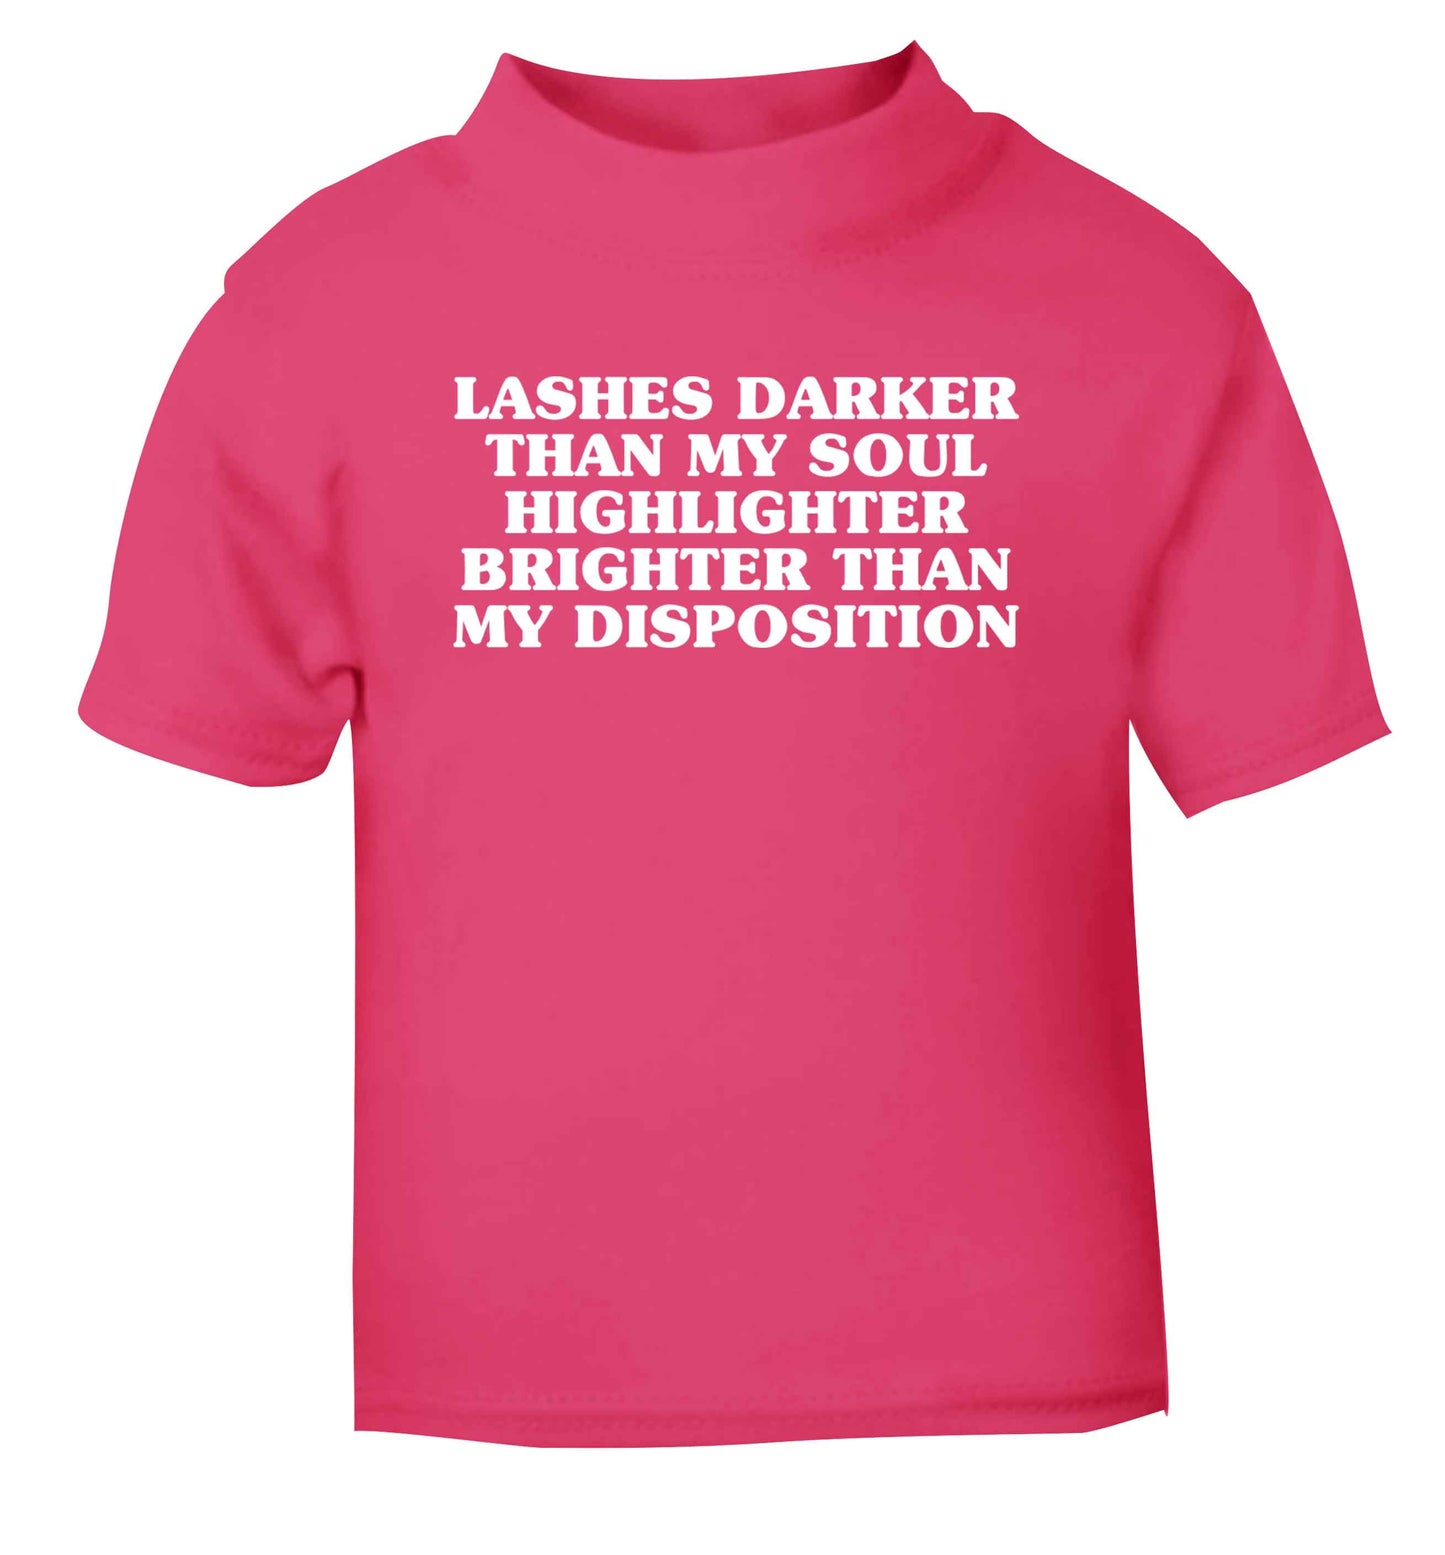 Lashes darker than my soul, highlighter brighter than my disposition pink Baby Toddler Tshirt 2 Years